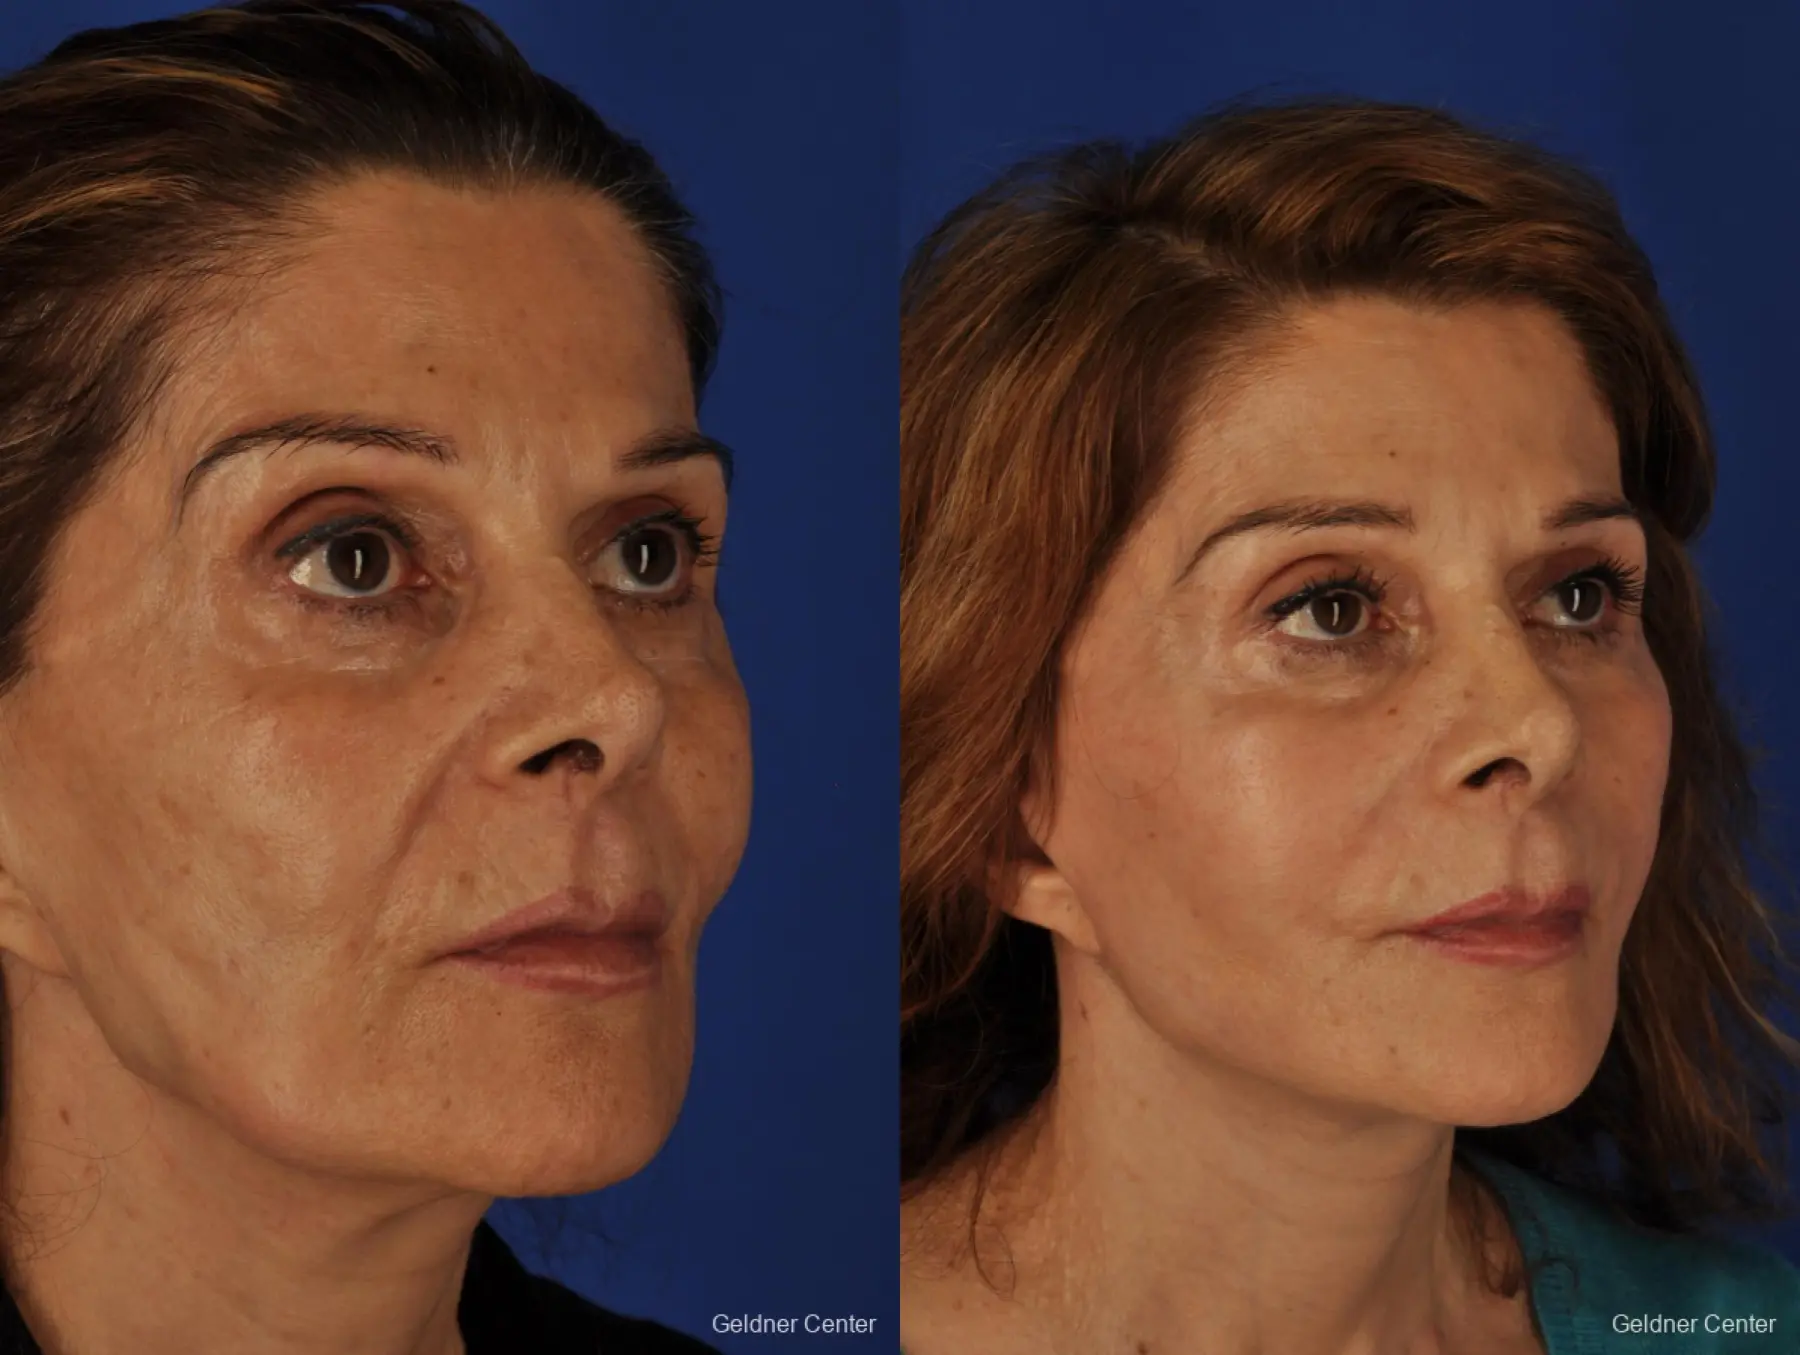 Facelift: Patient 4 - Before and After 3